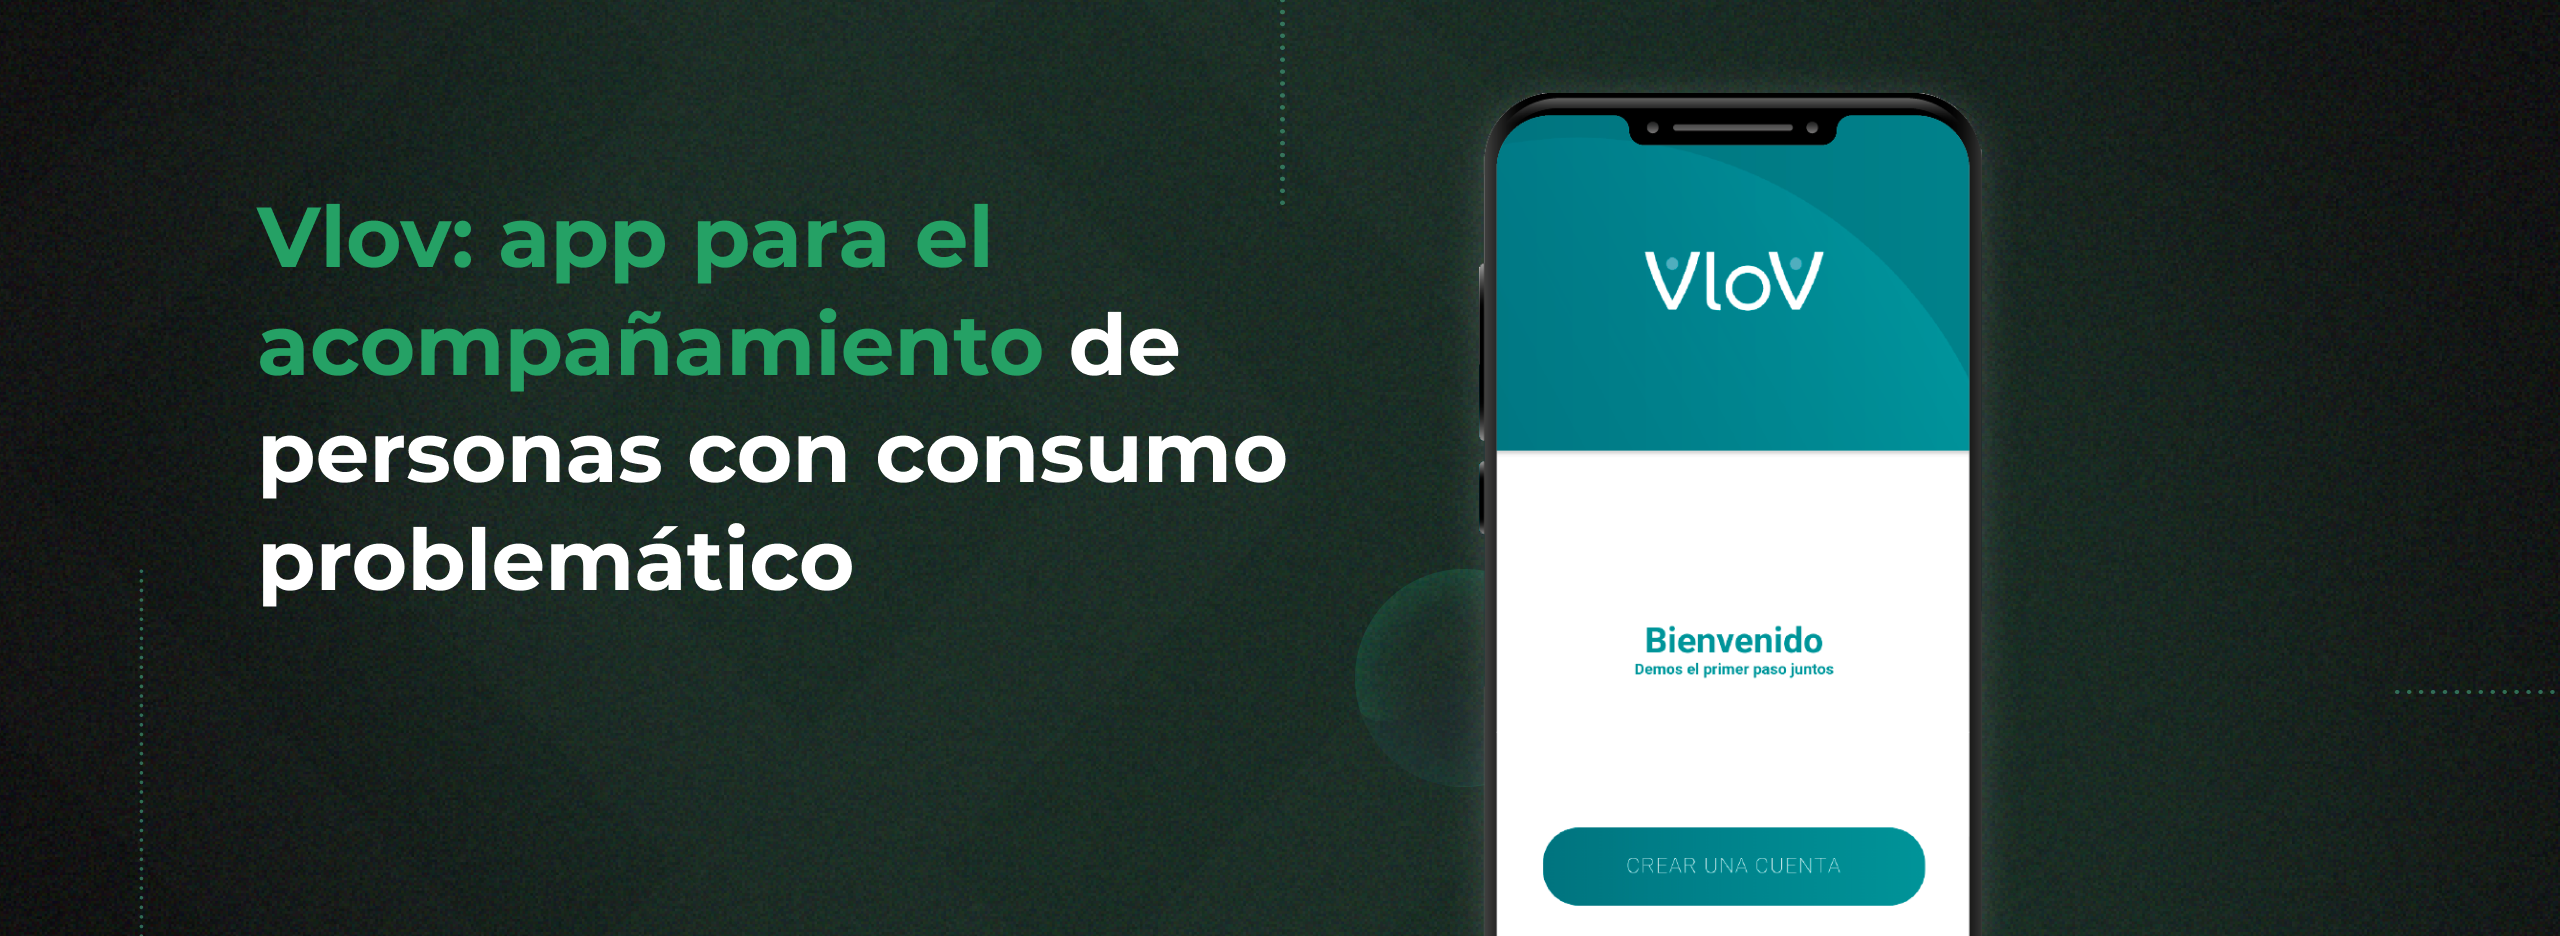 Vlov: support app for people with problematic consumption